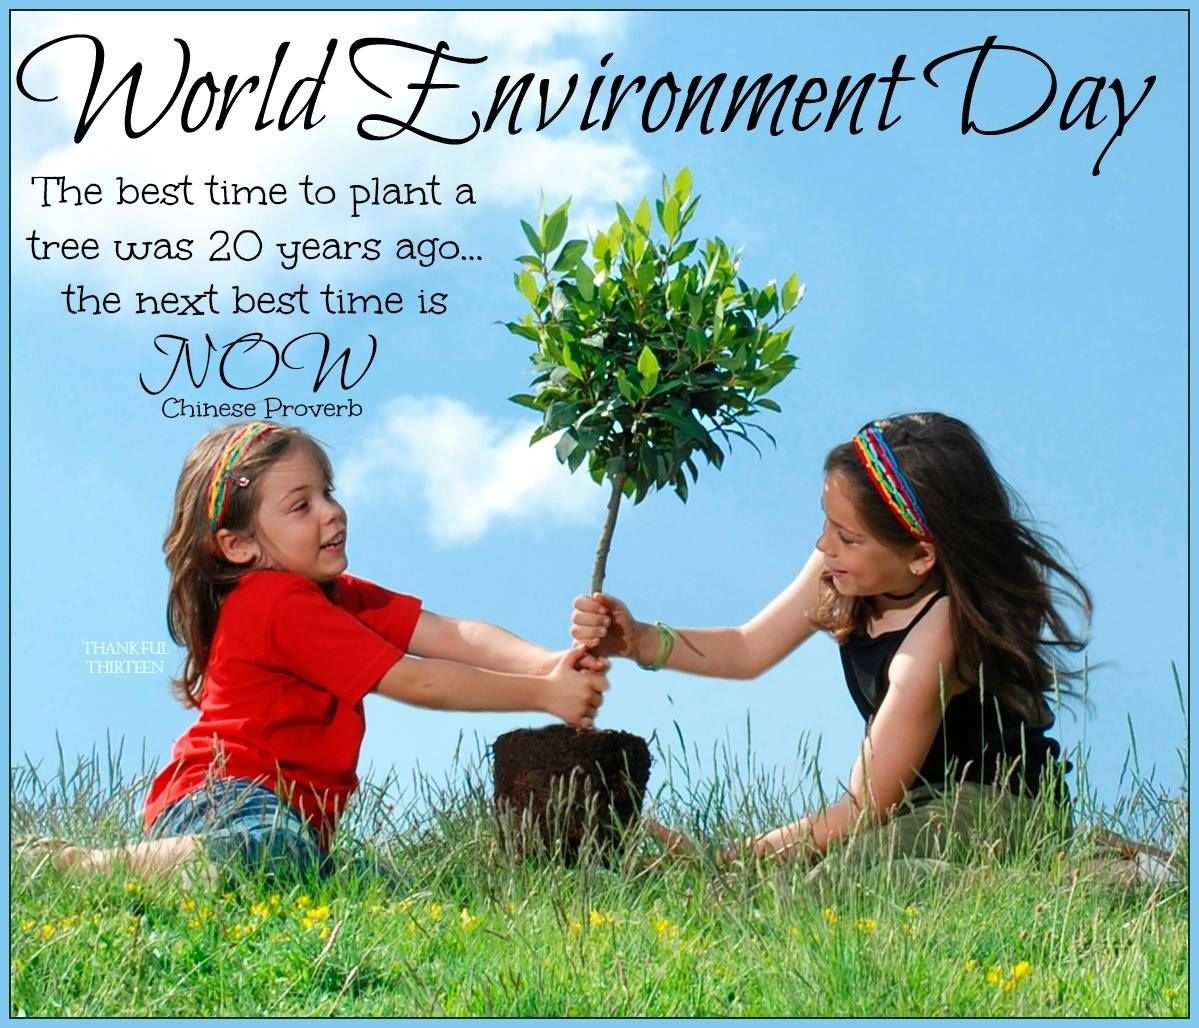 World Environment Day The Best Time To Plant A Tree Was 20 Years Ago The Next Best Time Is Now